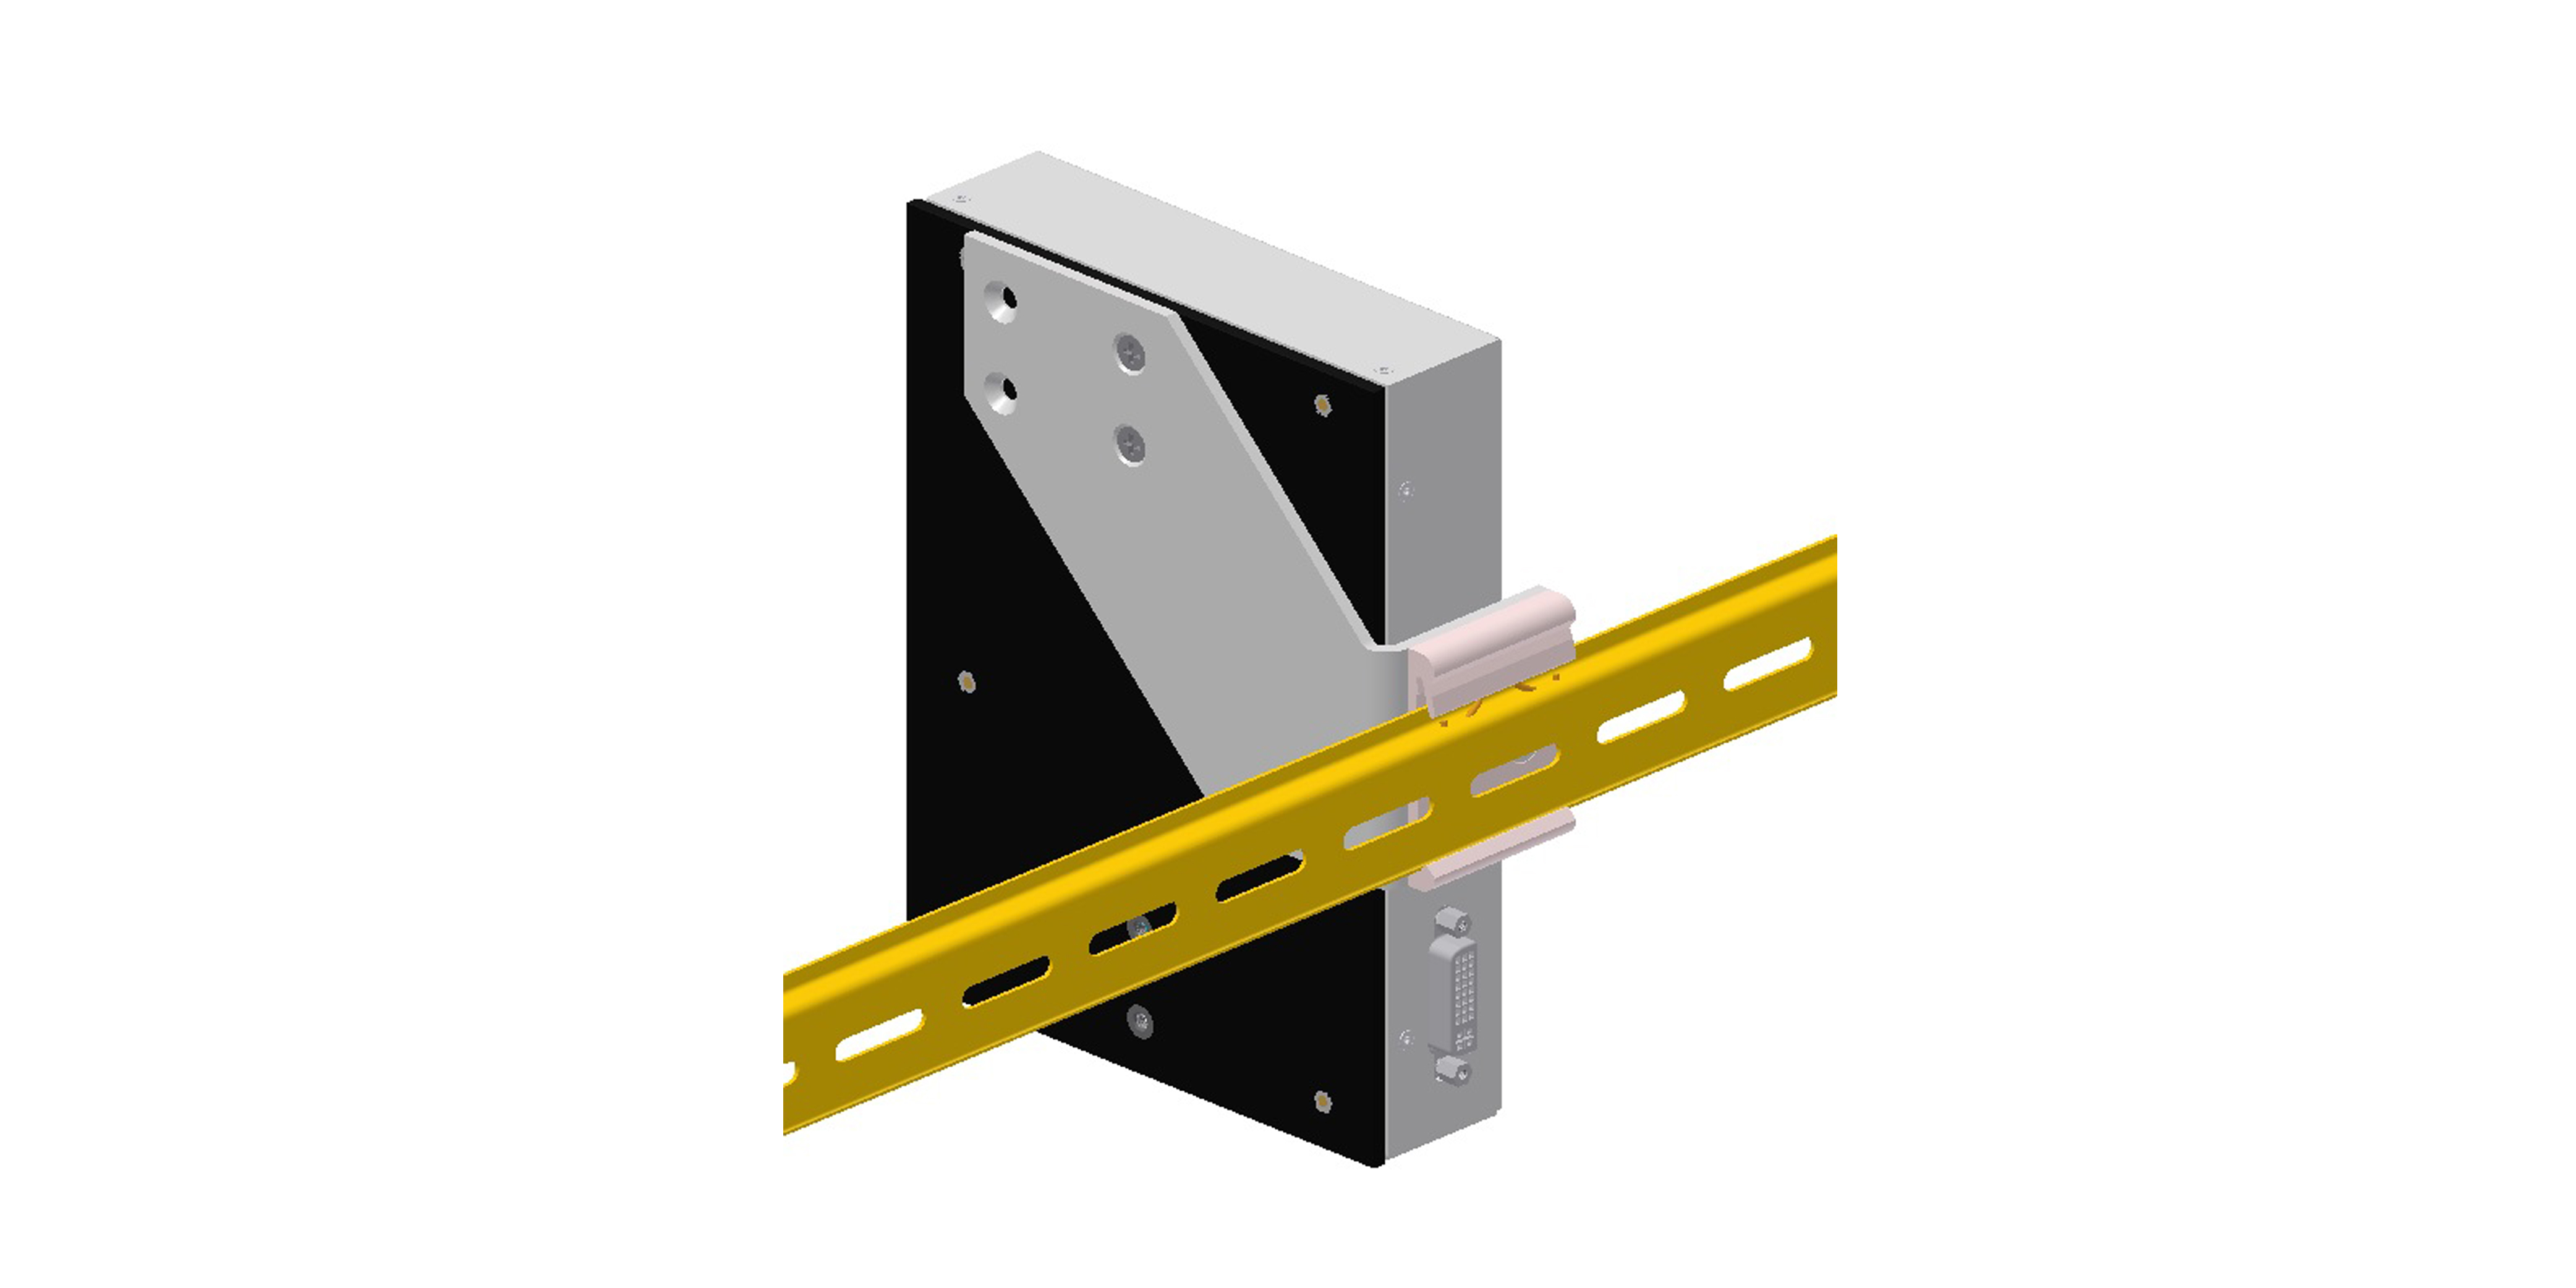 Rear Mounting Kit for Syslogic Industrial PC's